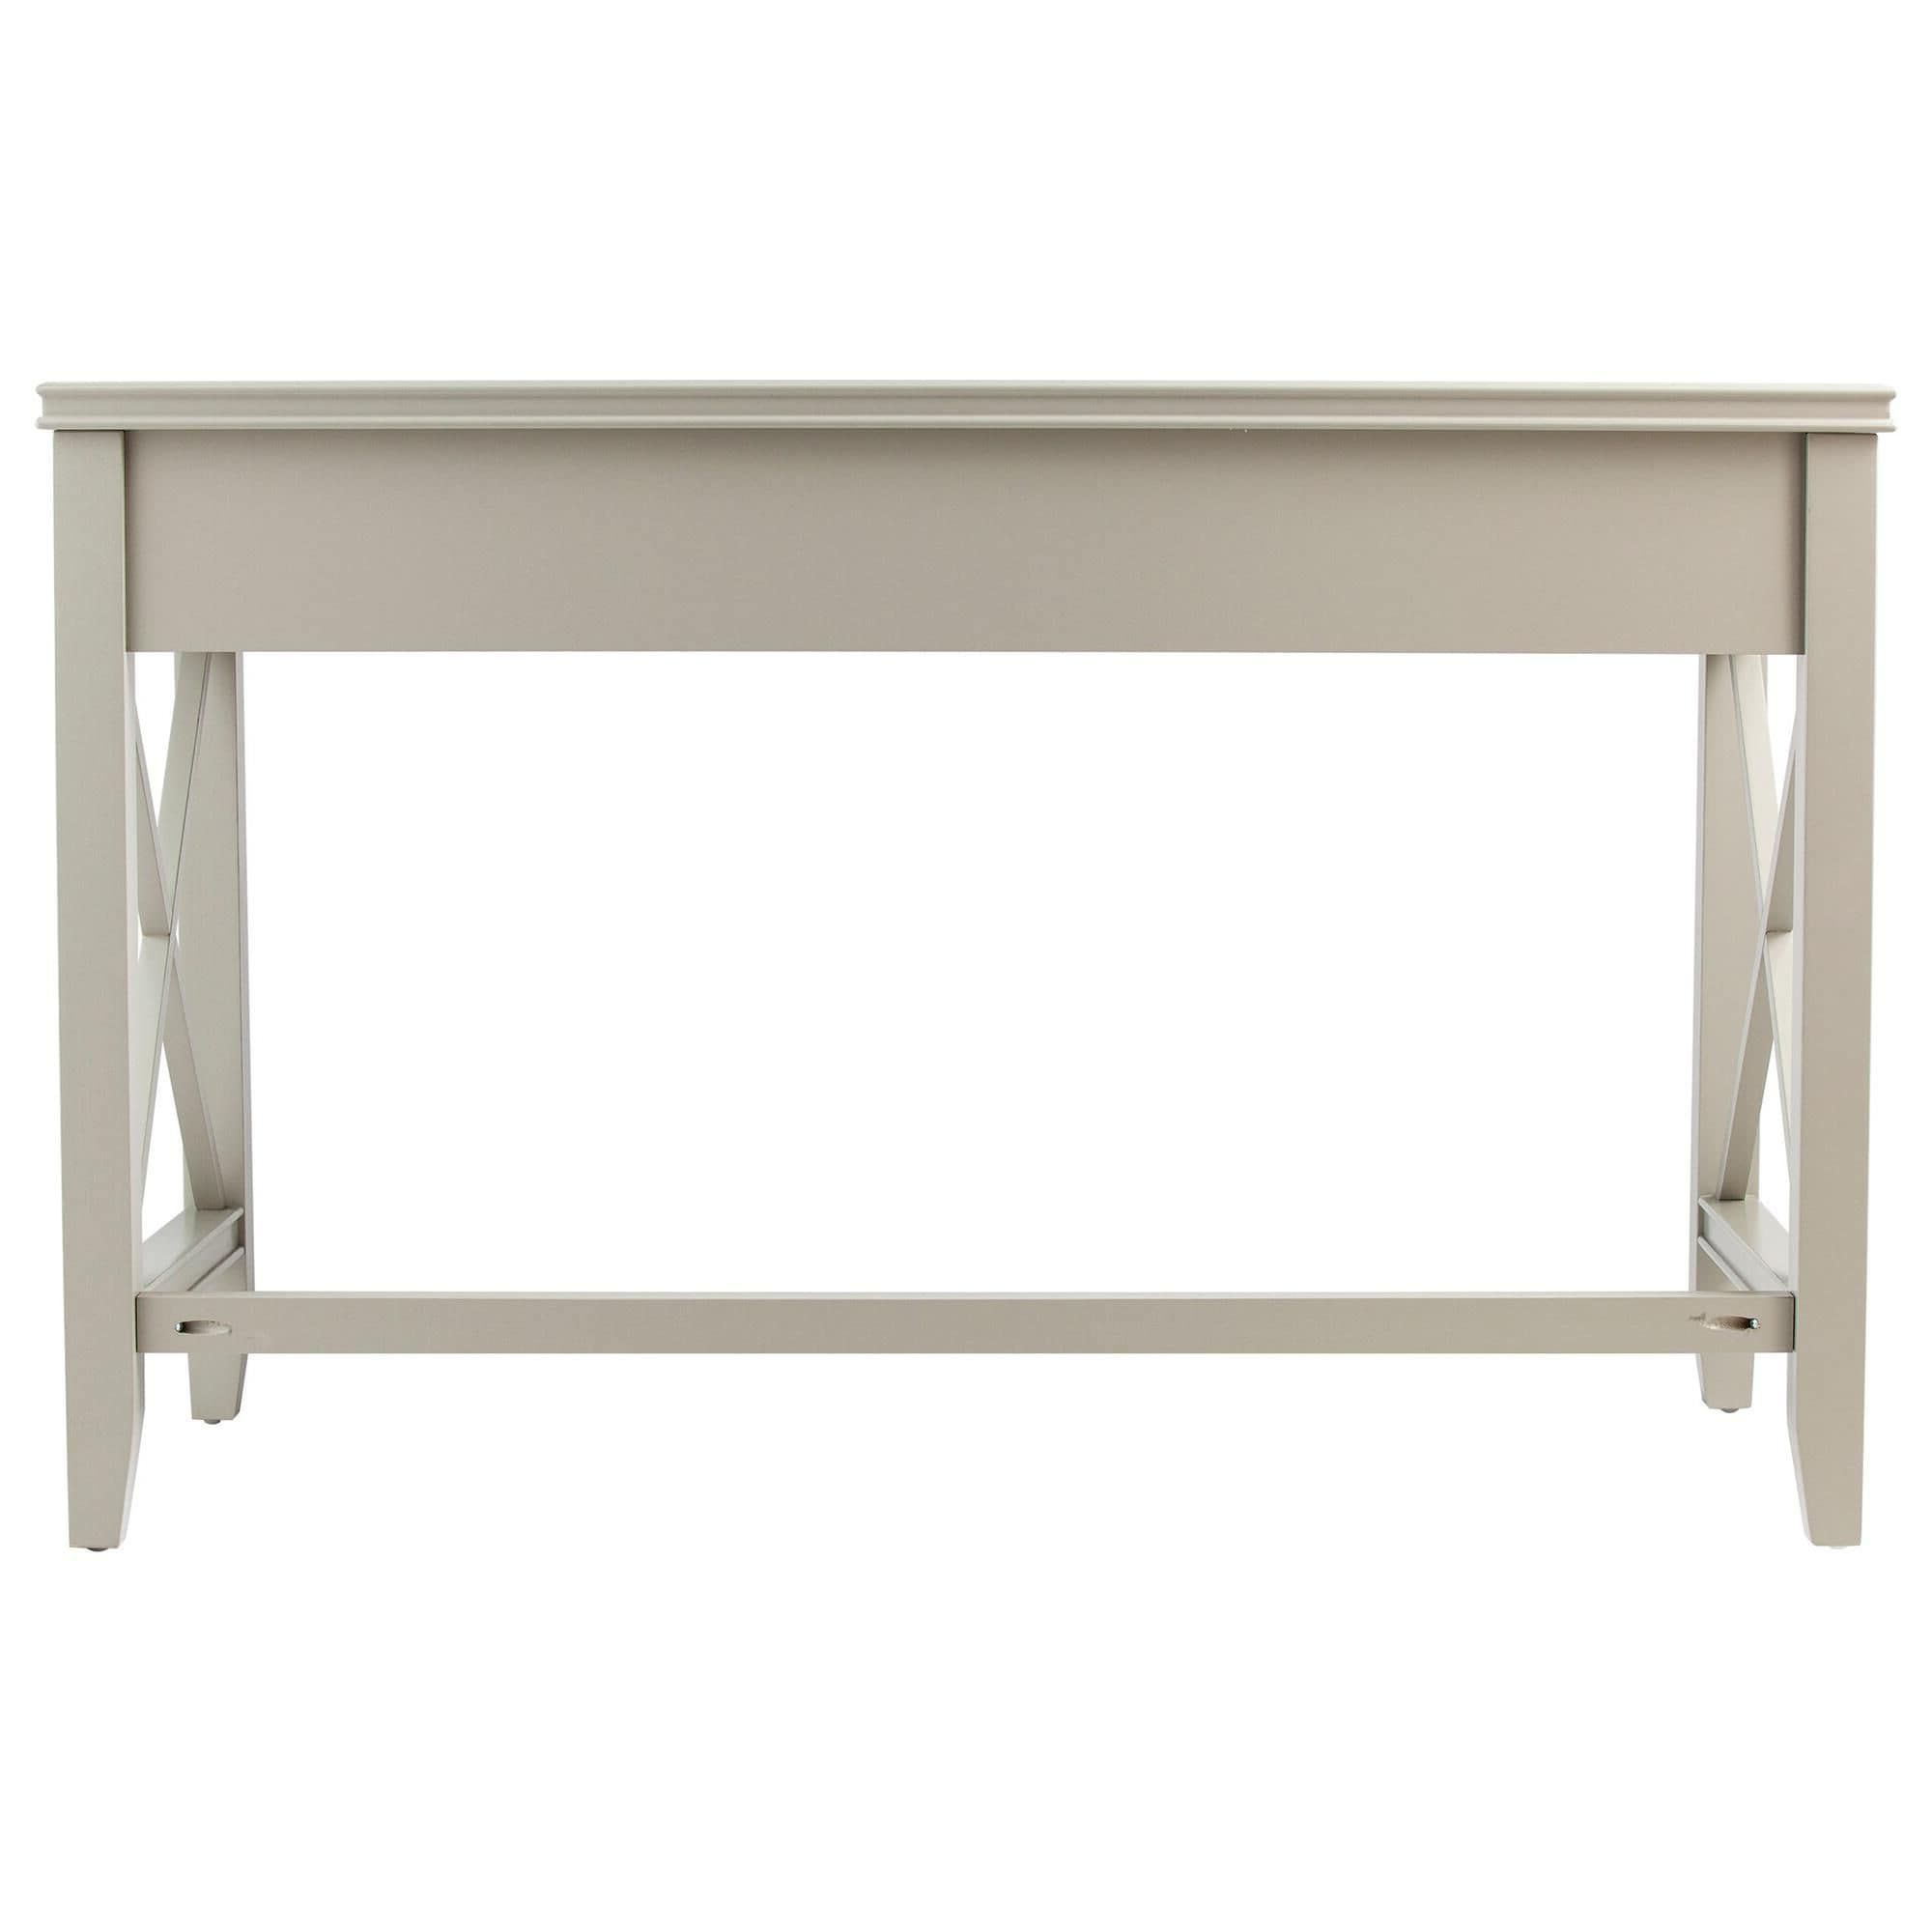 Southern Enterprises Larksmill Writing Desk In Gray And Silver (View 6 of 10)